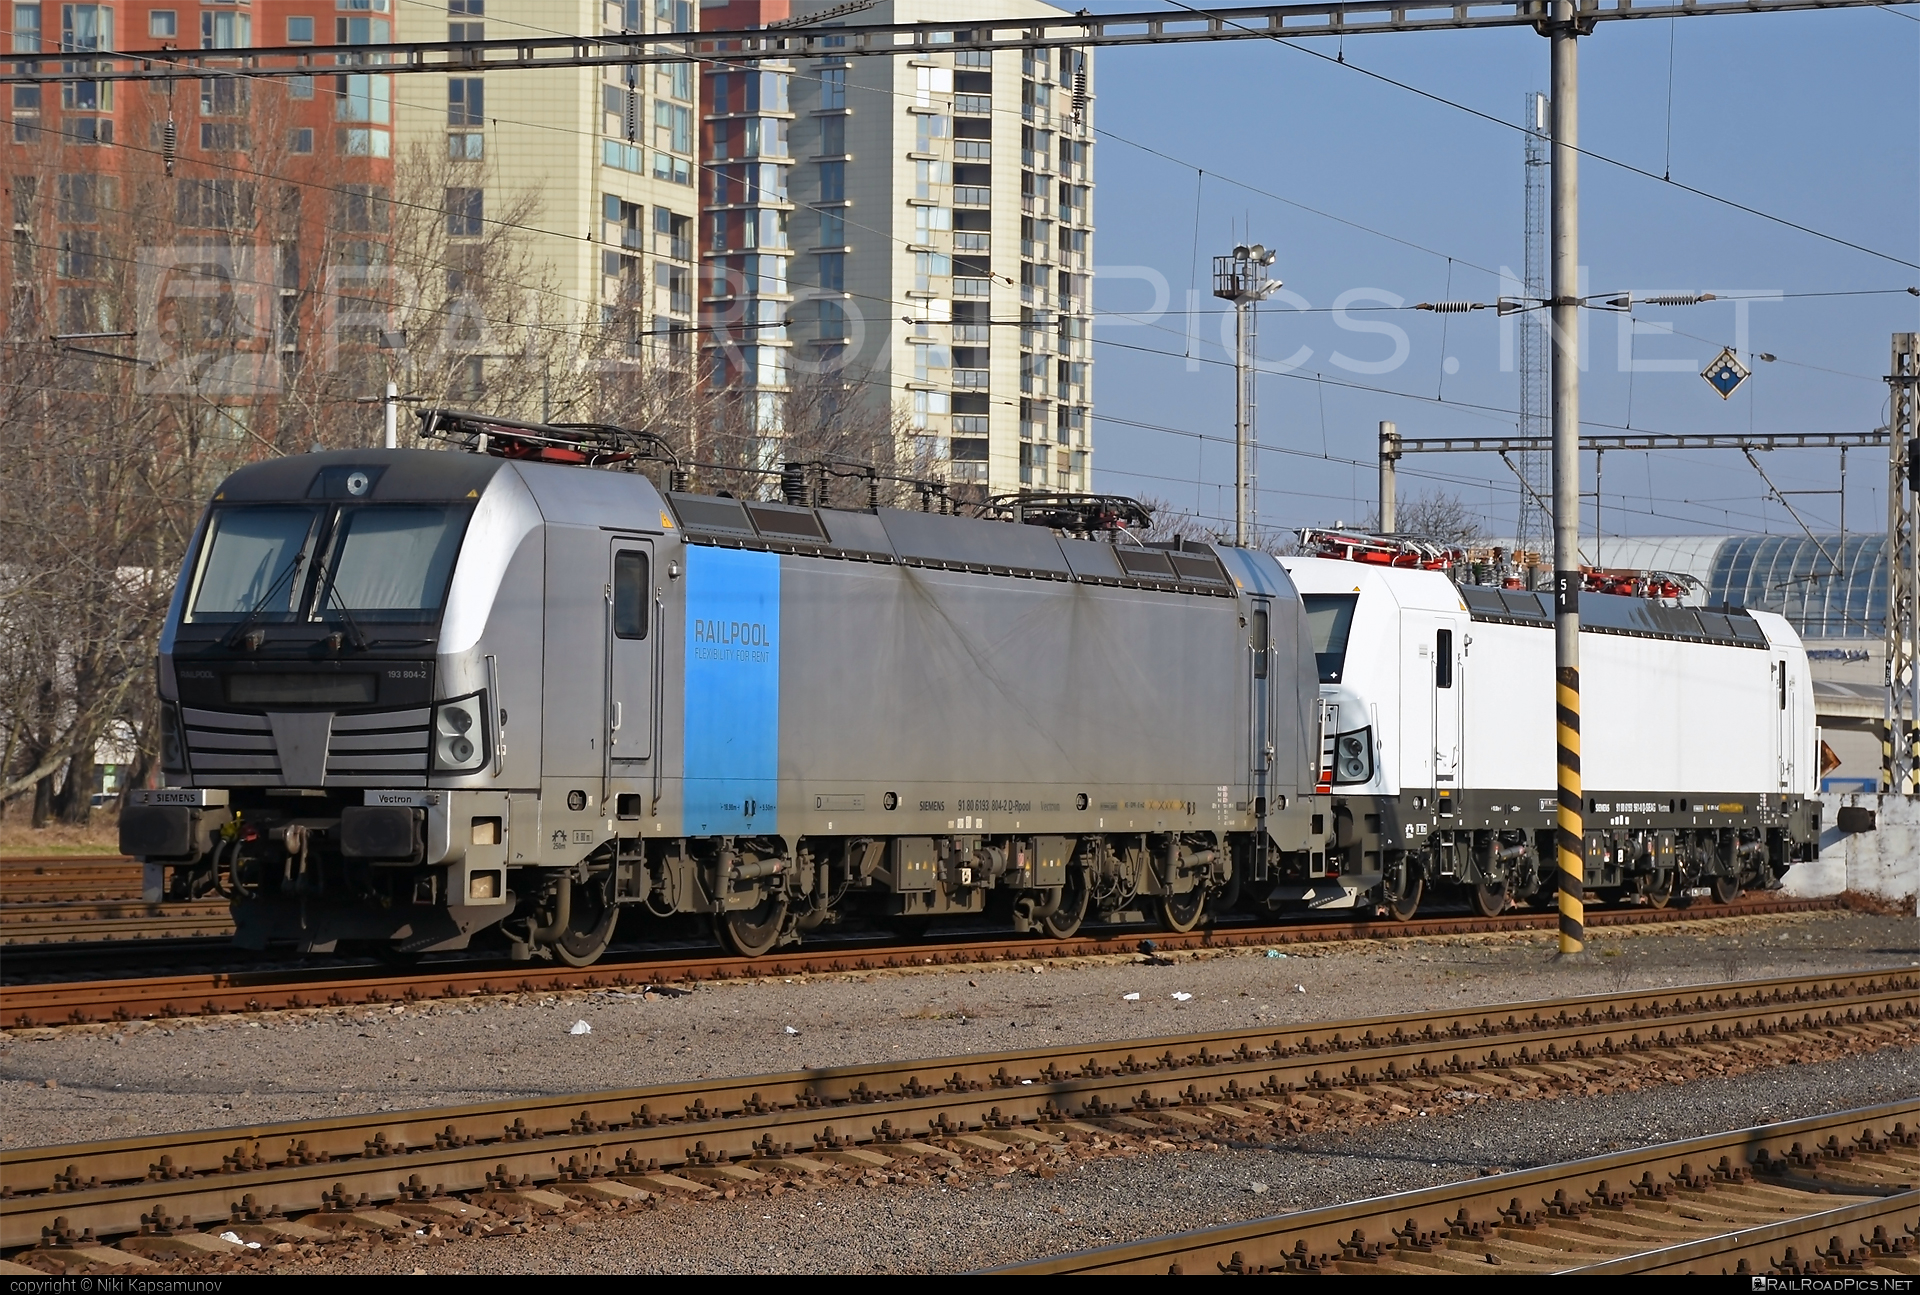 Siemens Vectron AC - 193 804-2 operated by ecco-rail GmbH #eccorail #eccorailgmbh #railpool #railpoolgmbh #siemens #siemensvectron #siemensvectronac #vectron #vectronac